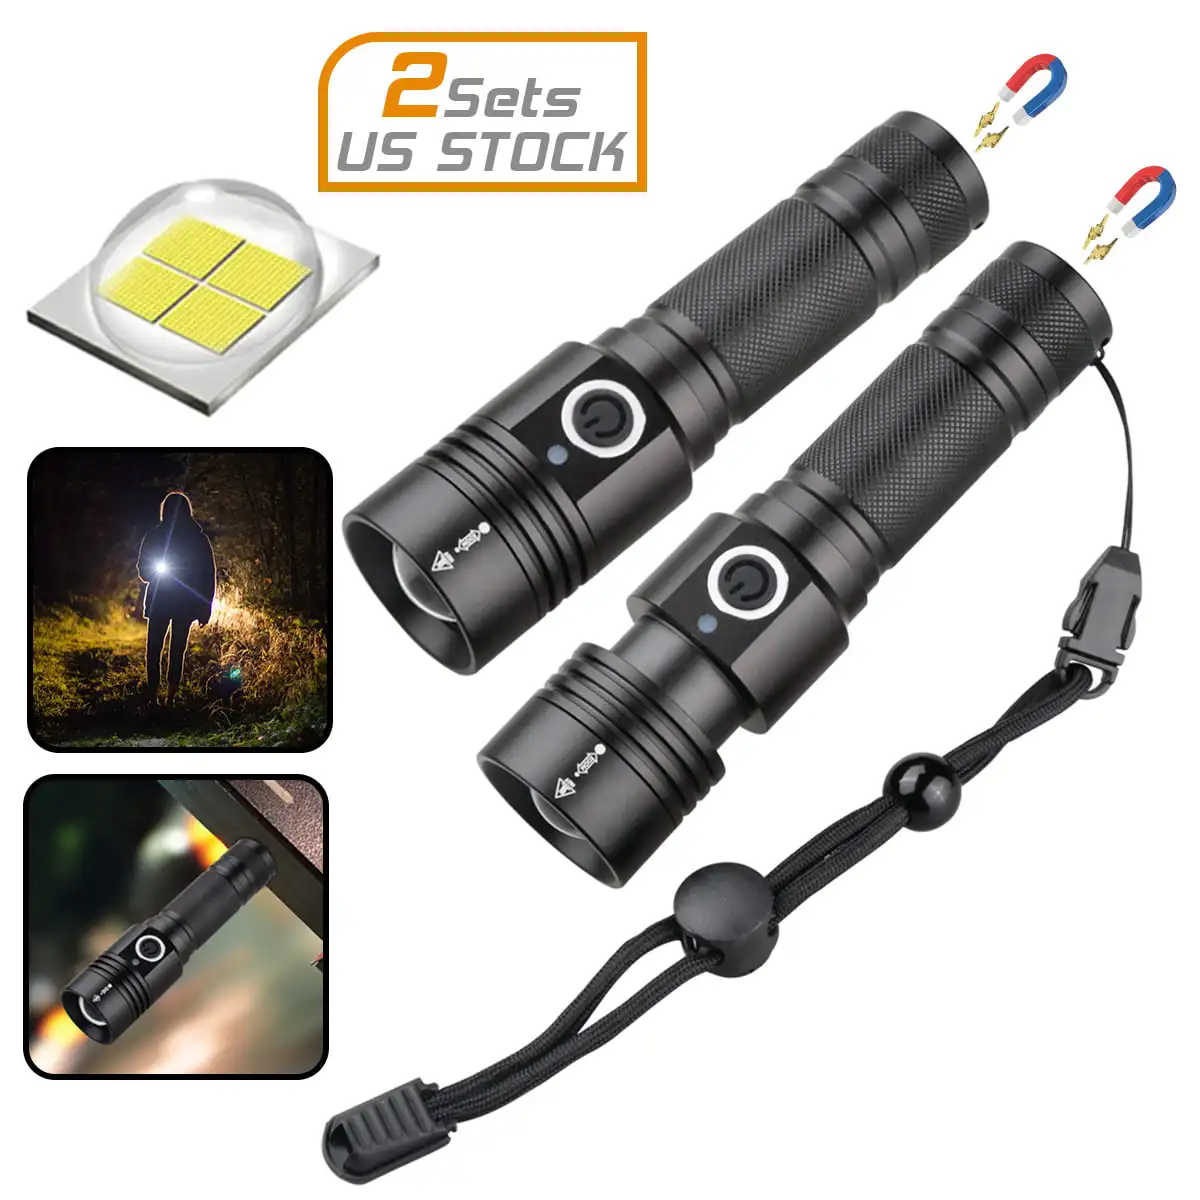 

2 Sets USB Rechargeable Flashlight XHP50 LED 5000 Lumens Base Torch Lamp with Battery